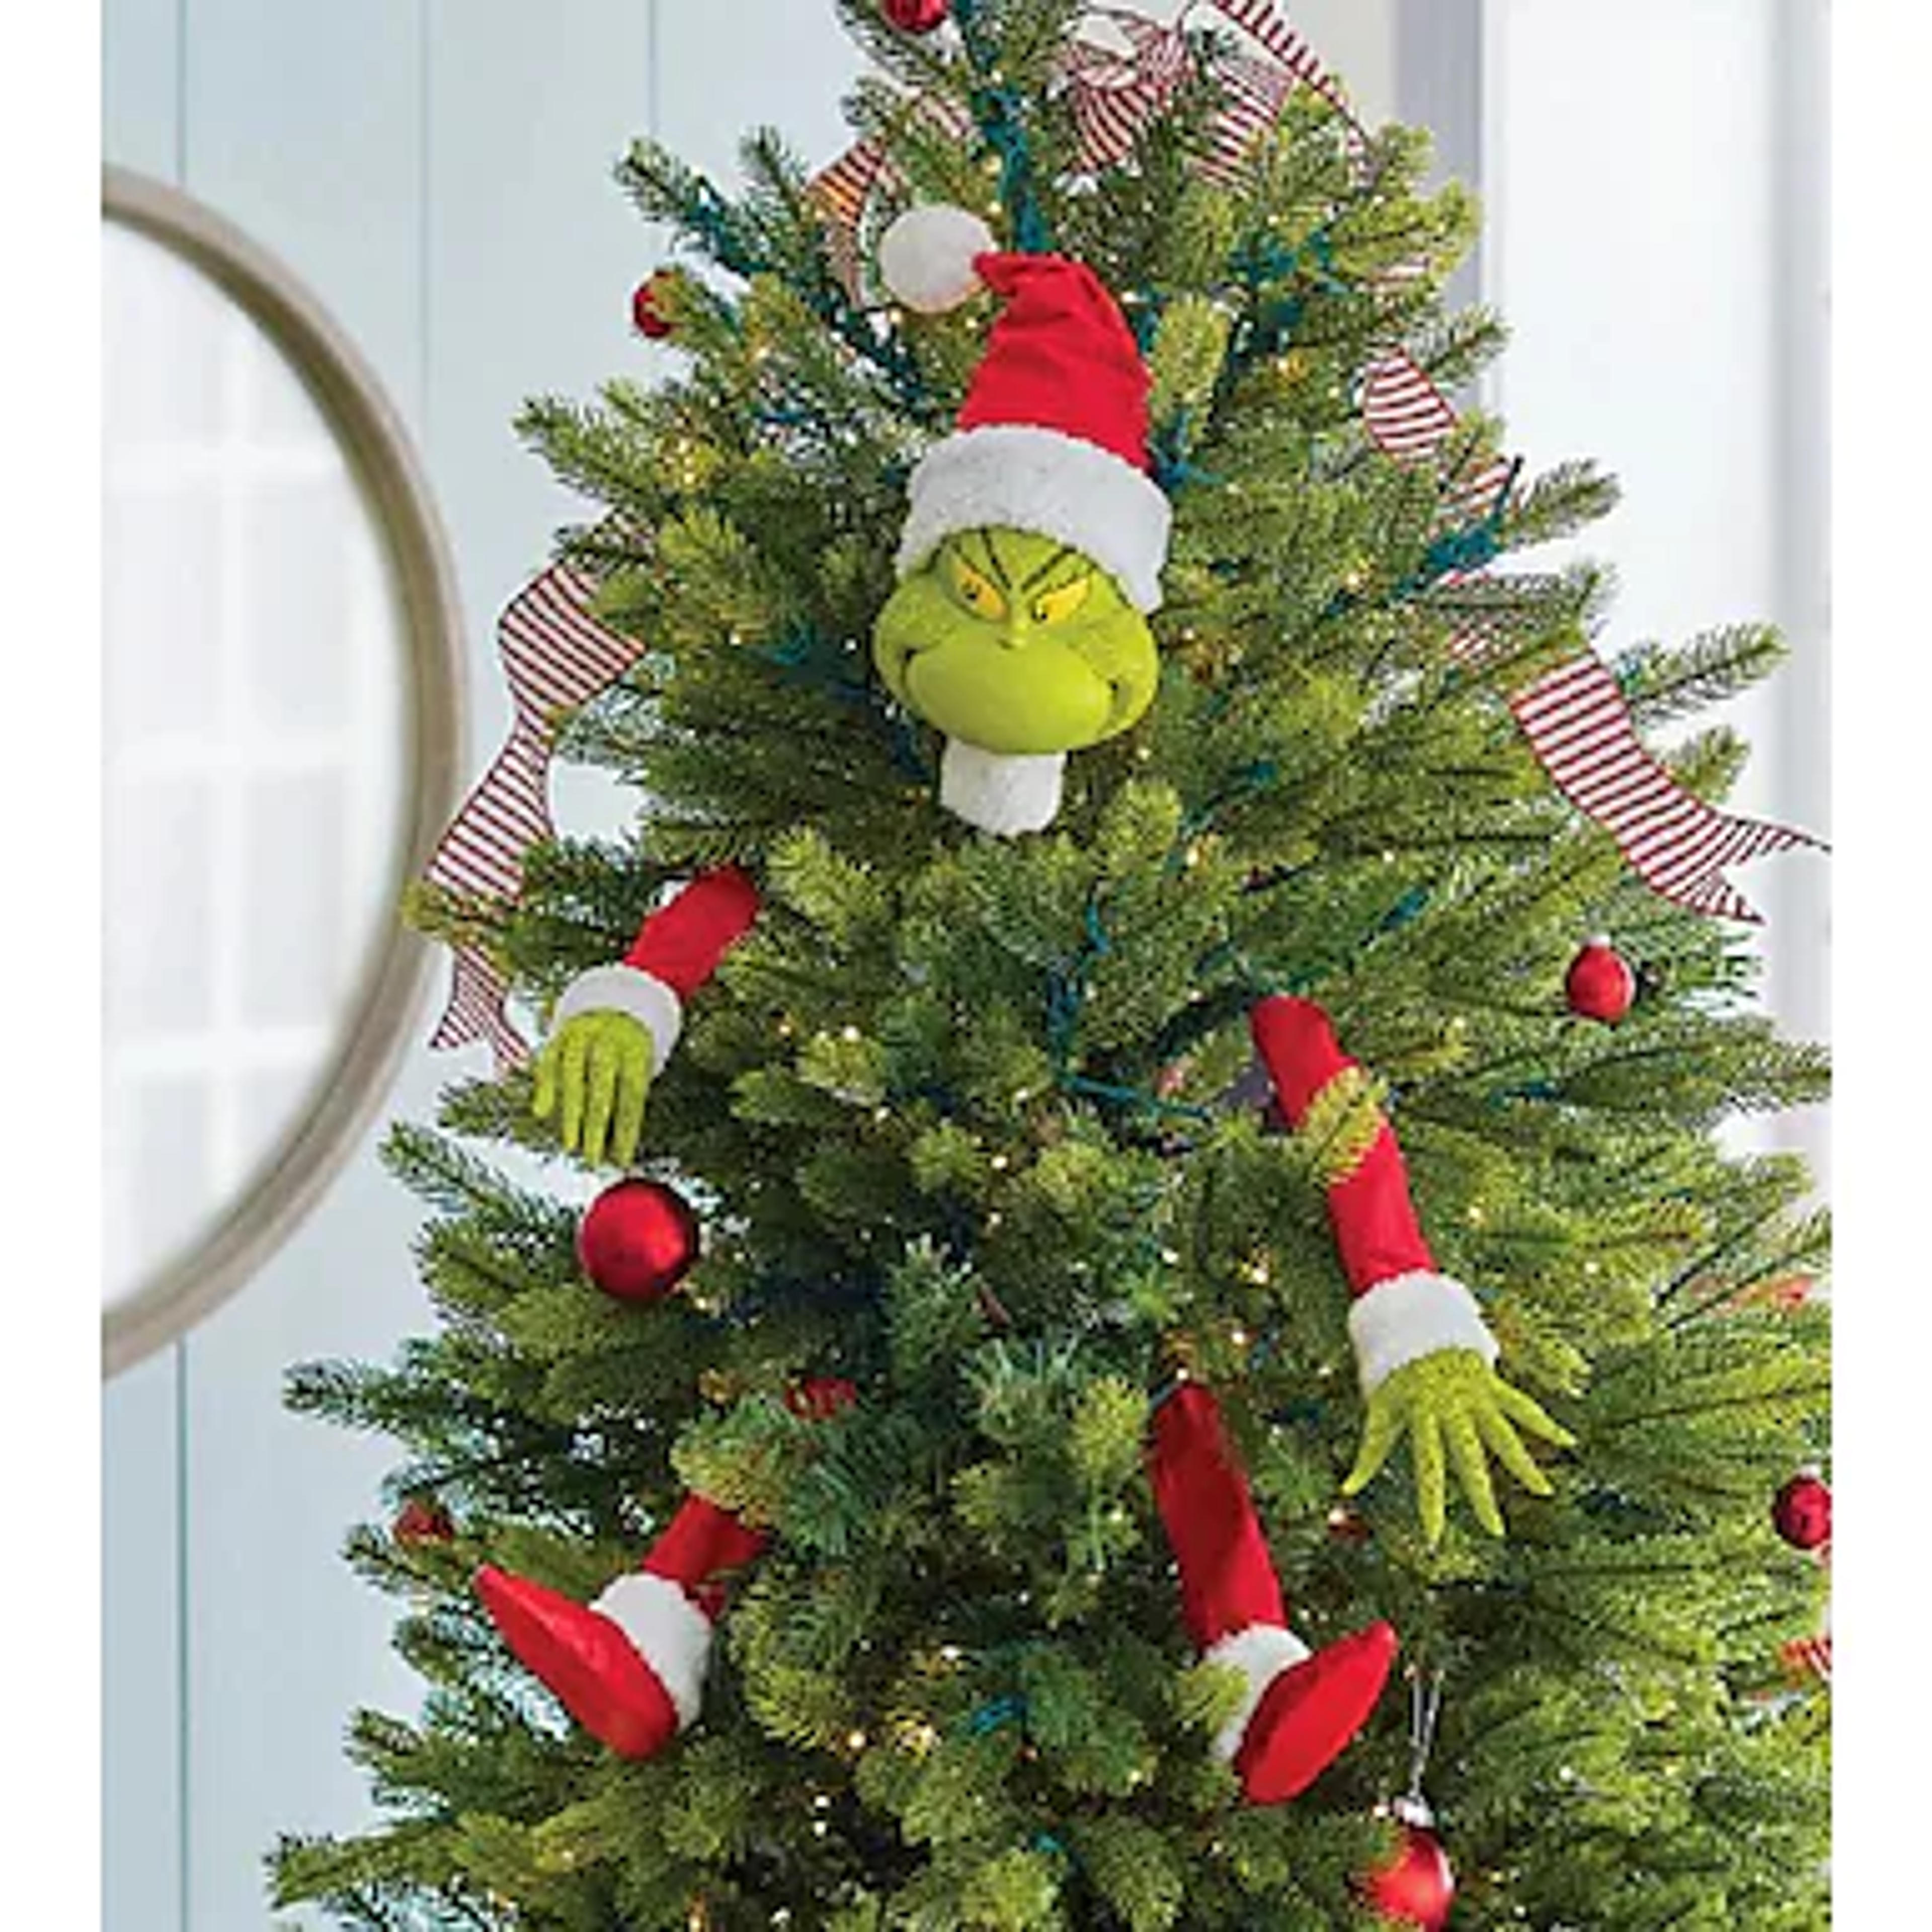 Grinch Christmas Tree Decorations Arm Head and Legs, Furry Green Head for Christmas Tree Decorations, Christmas Elf Body Decorations Ornament for Home Party 9343739 2022 – $27.99